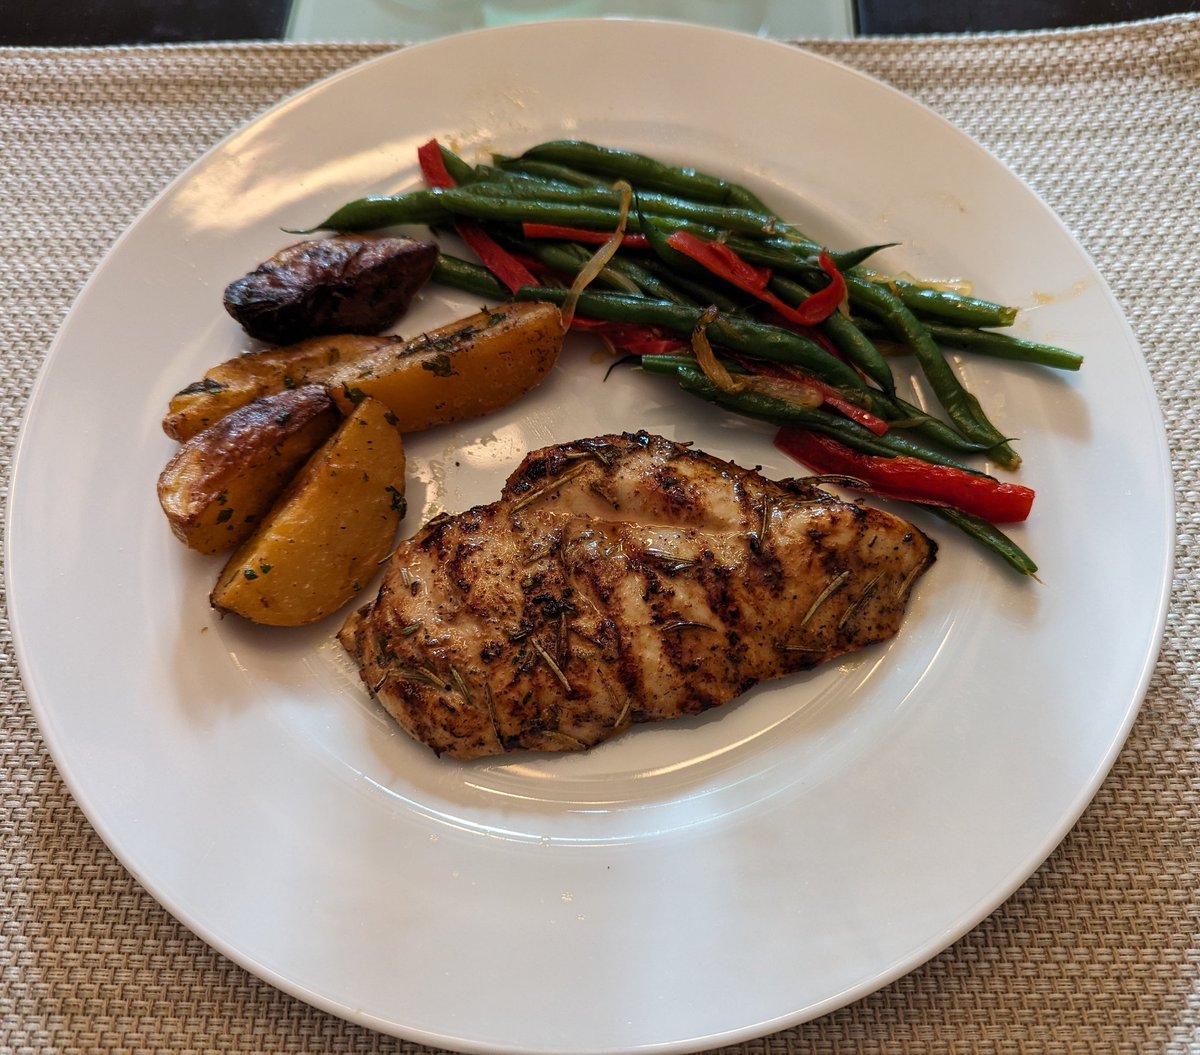 Grilled Chicken Rosemary (marinated in wine), French Beans w/red peppers and shallots, lemon potatoes. A little Pinot Grigio to accompany.
#twittersupperclub #XSupperclub